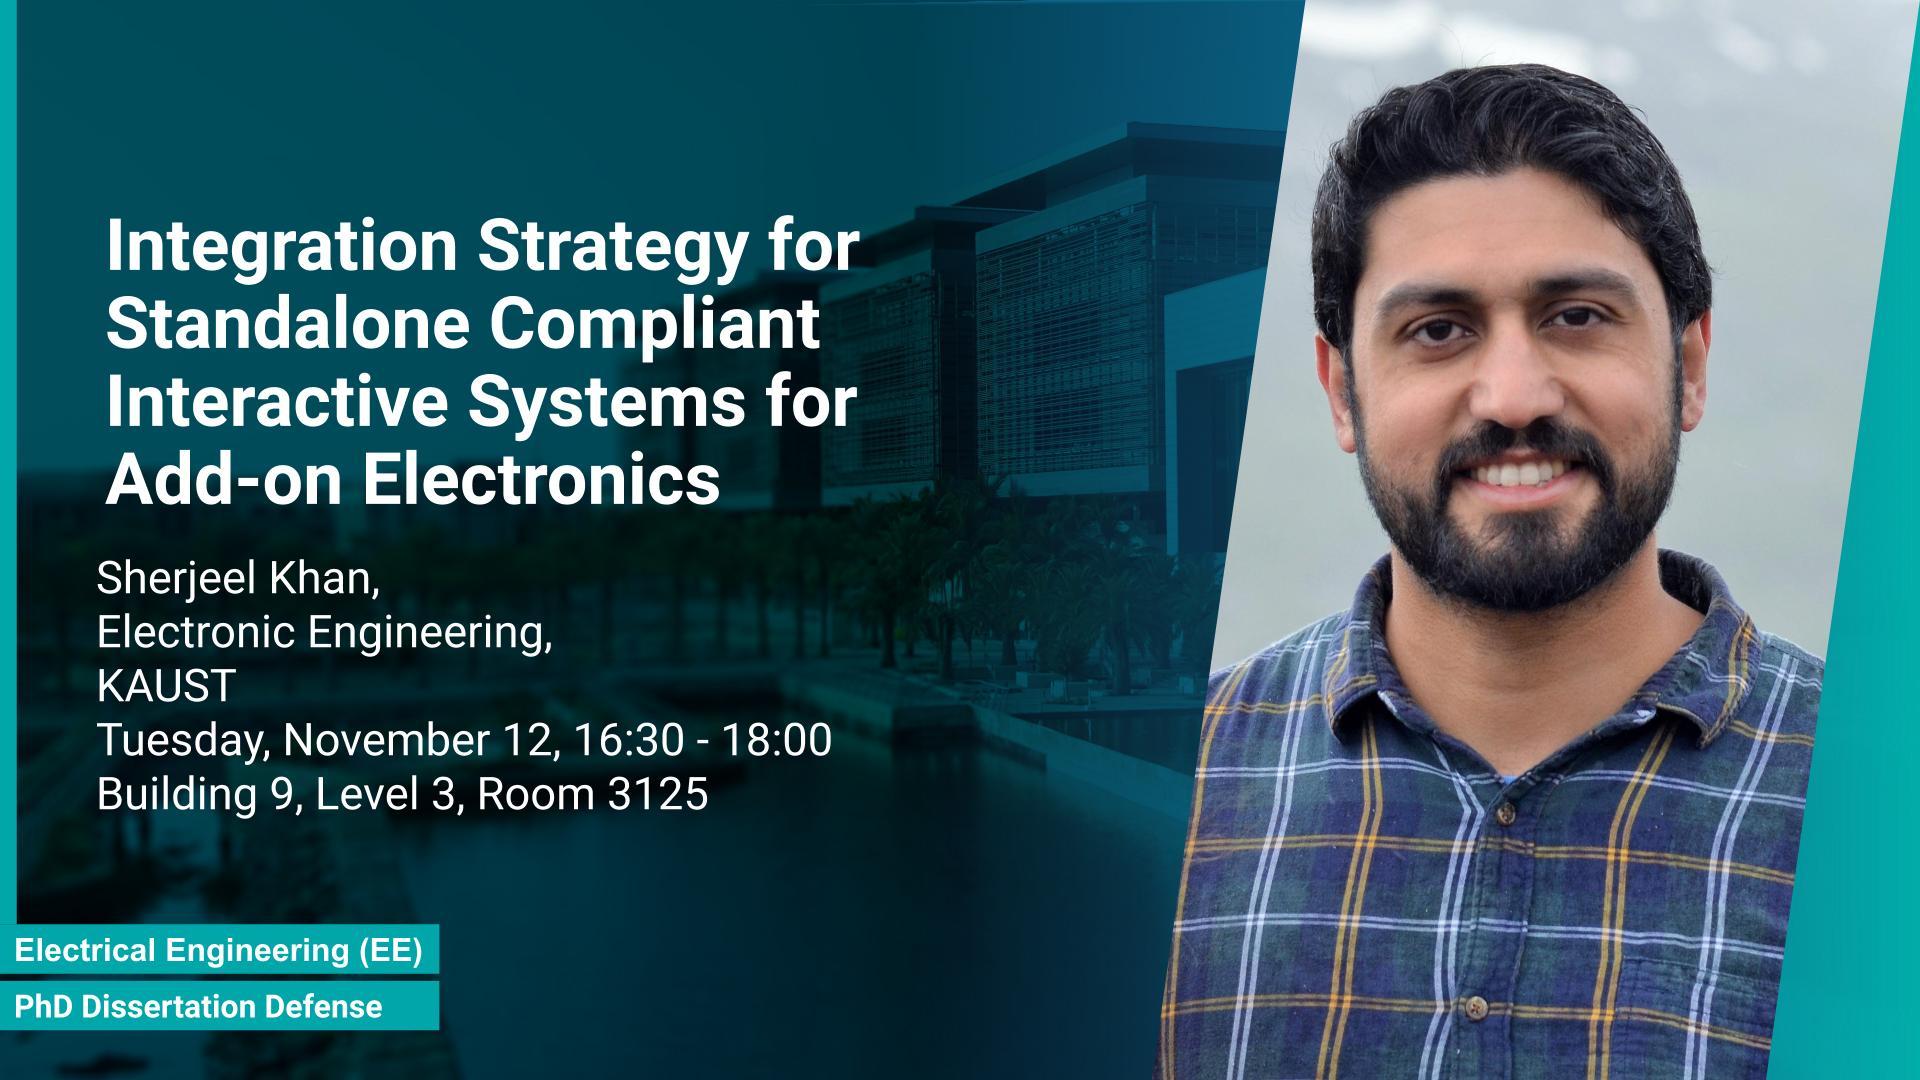 KAUST CEMSE EE PhD Dissertation Defense Integration Strategy for Add-on Electronics